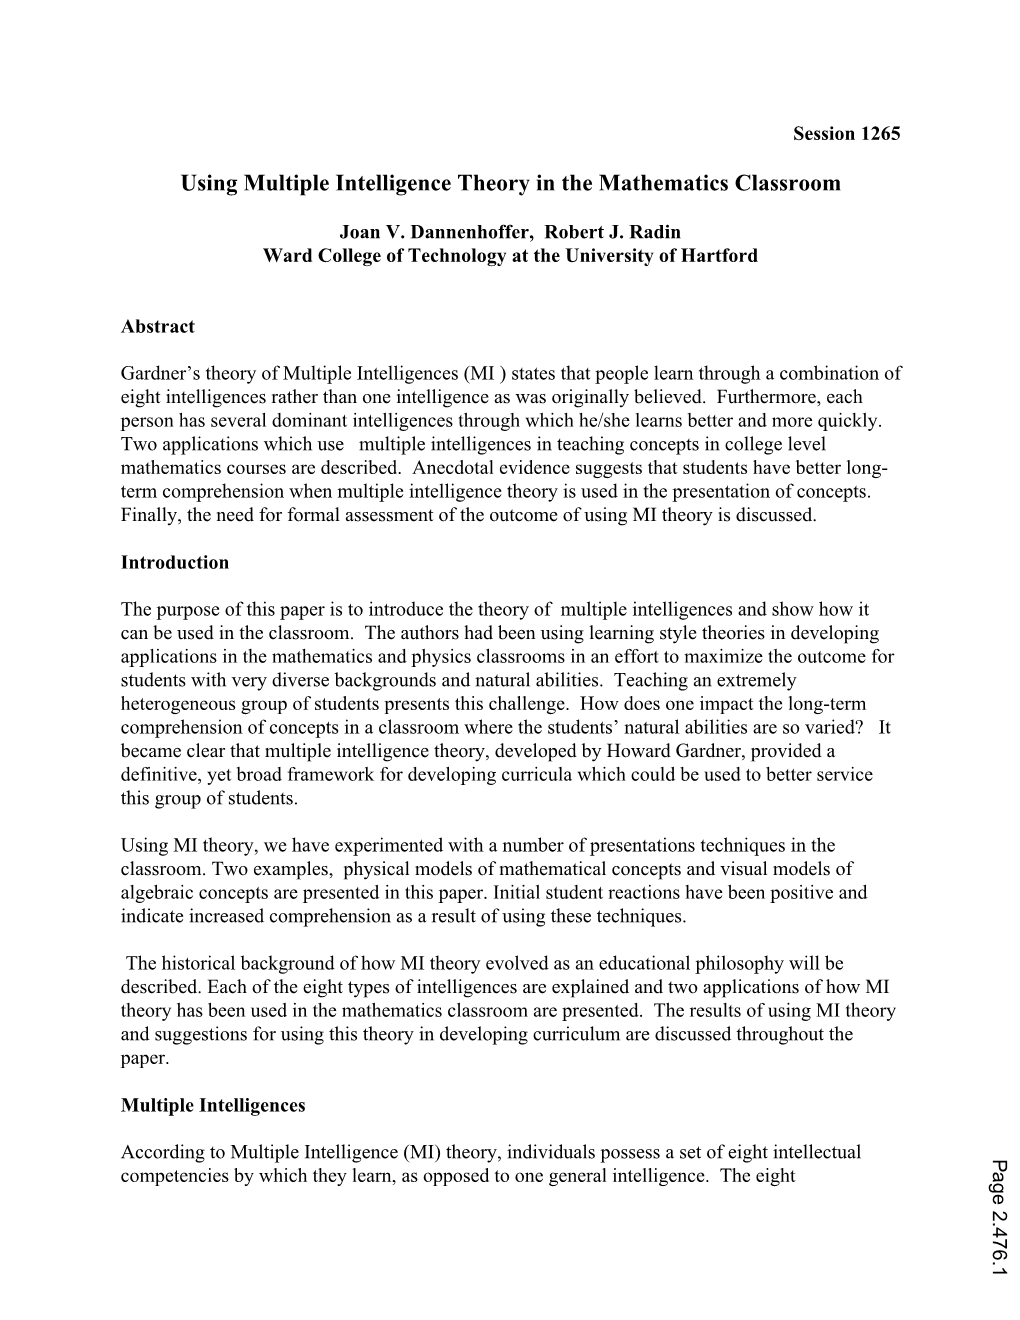 Using Multiple Intelligence Theory in the Mathematics Classroom